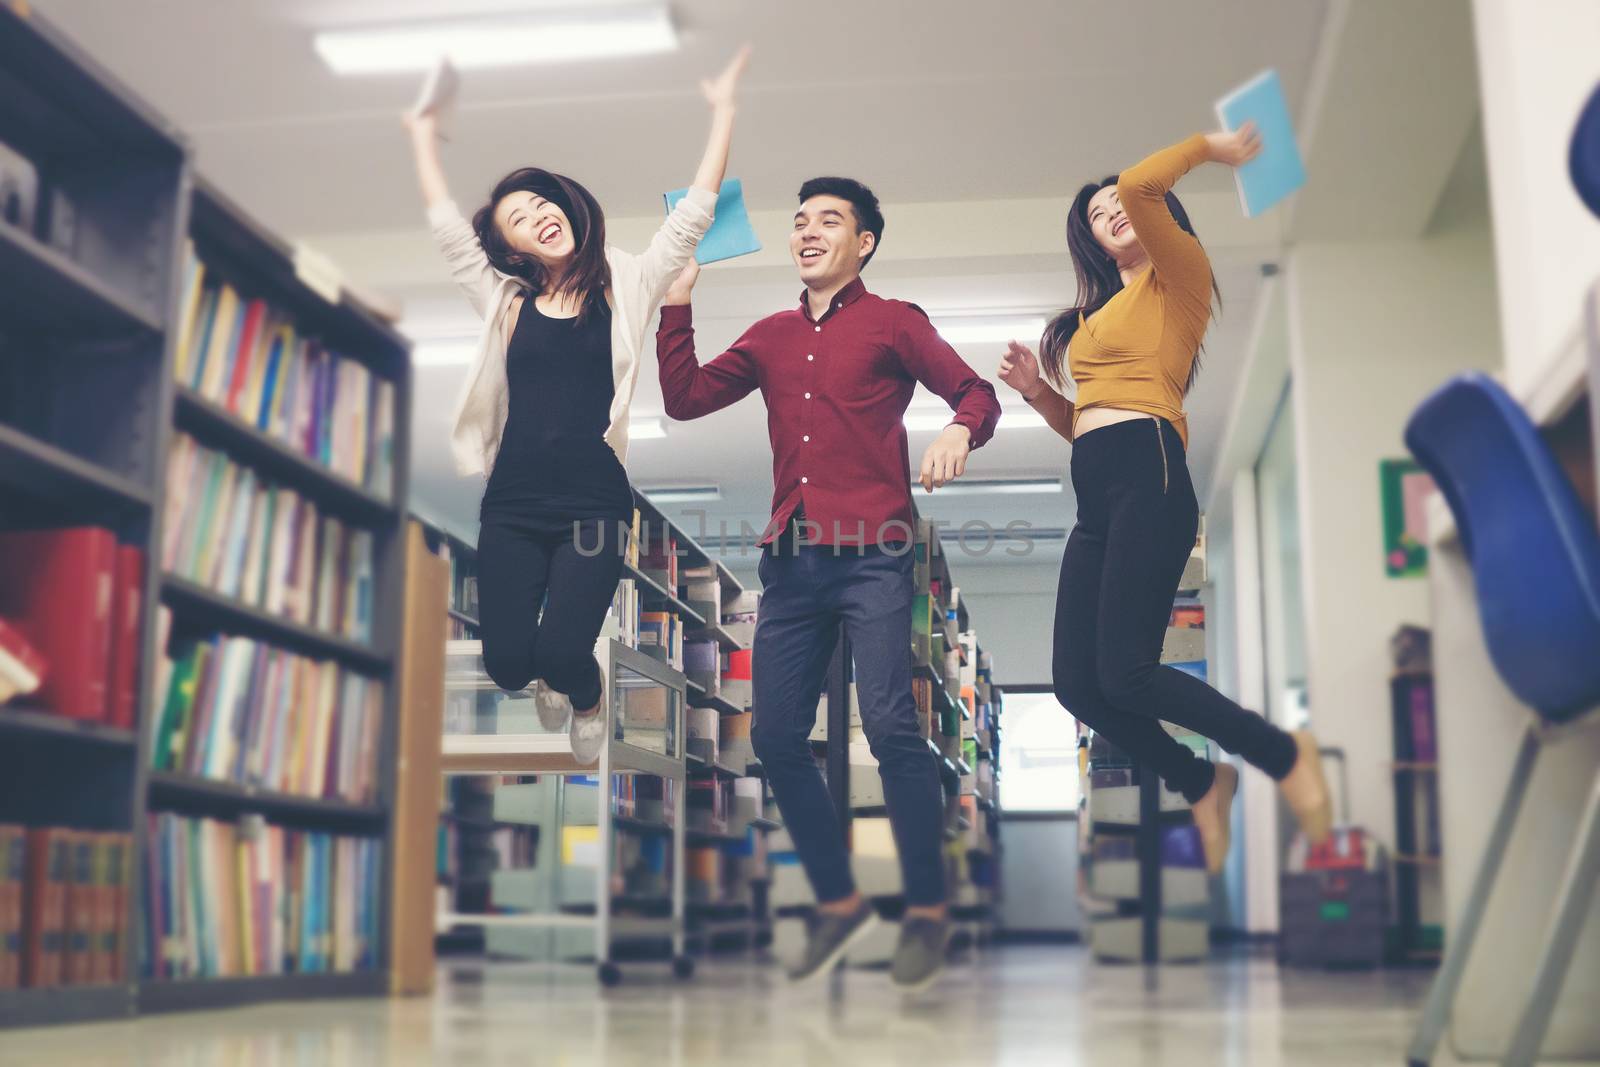 Group of student jumping in the library seem so happy.